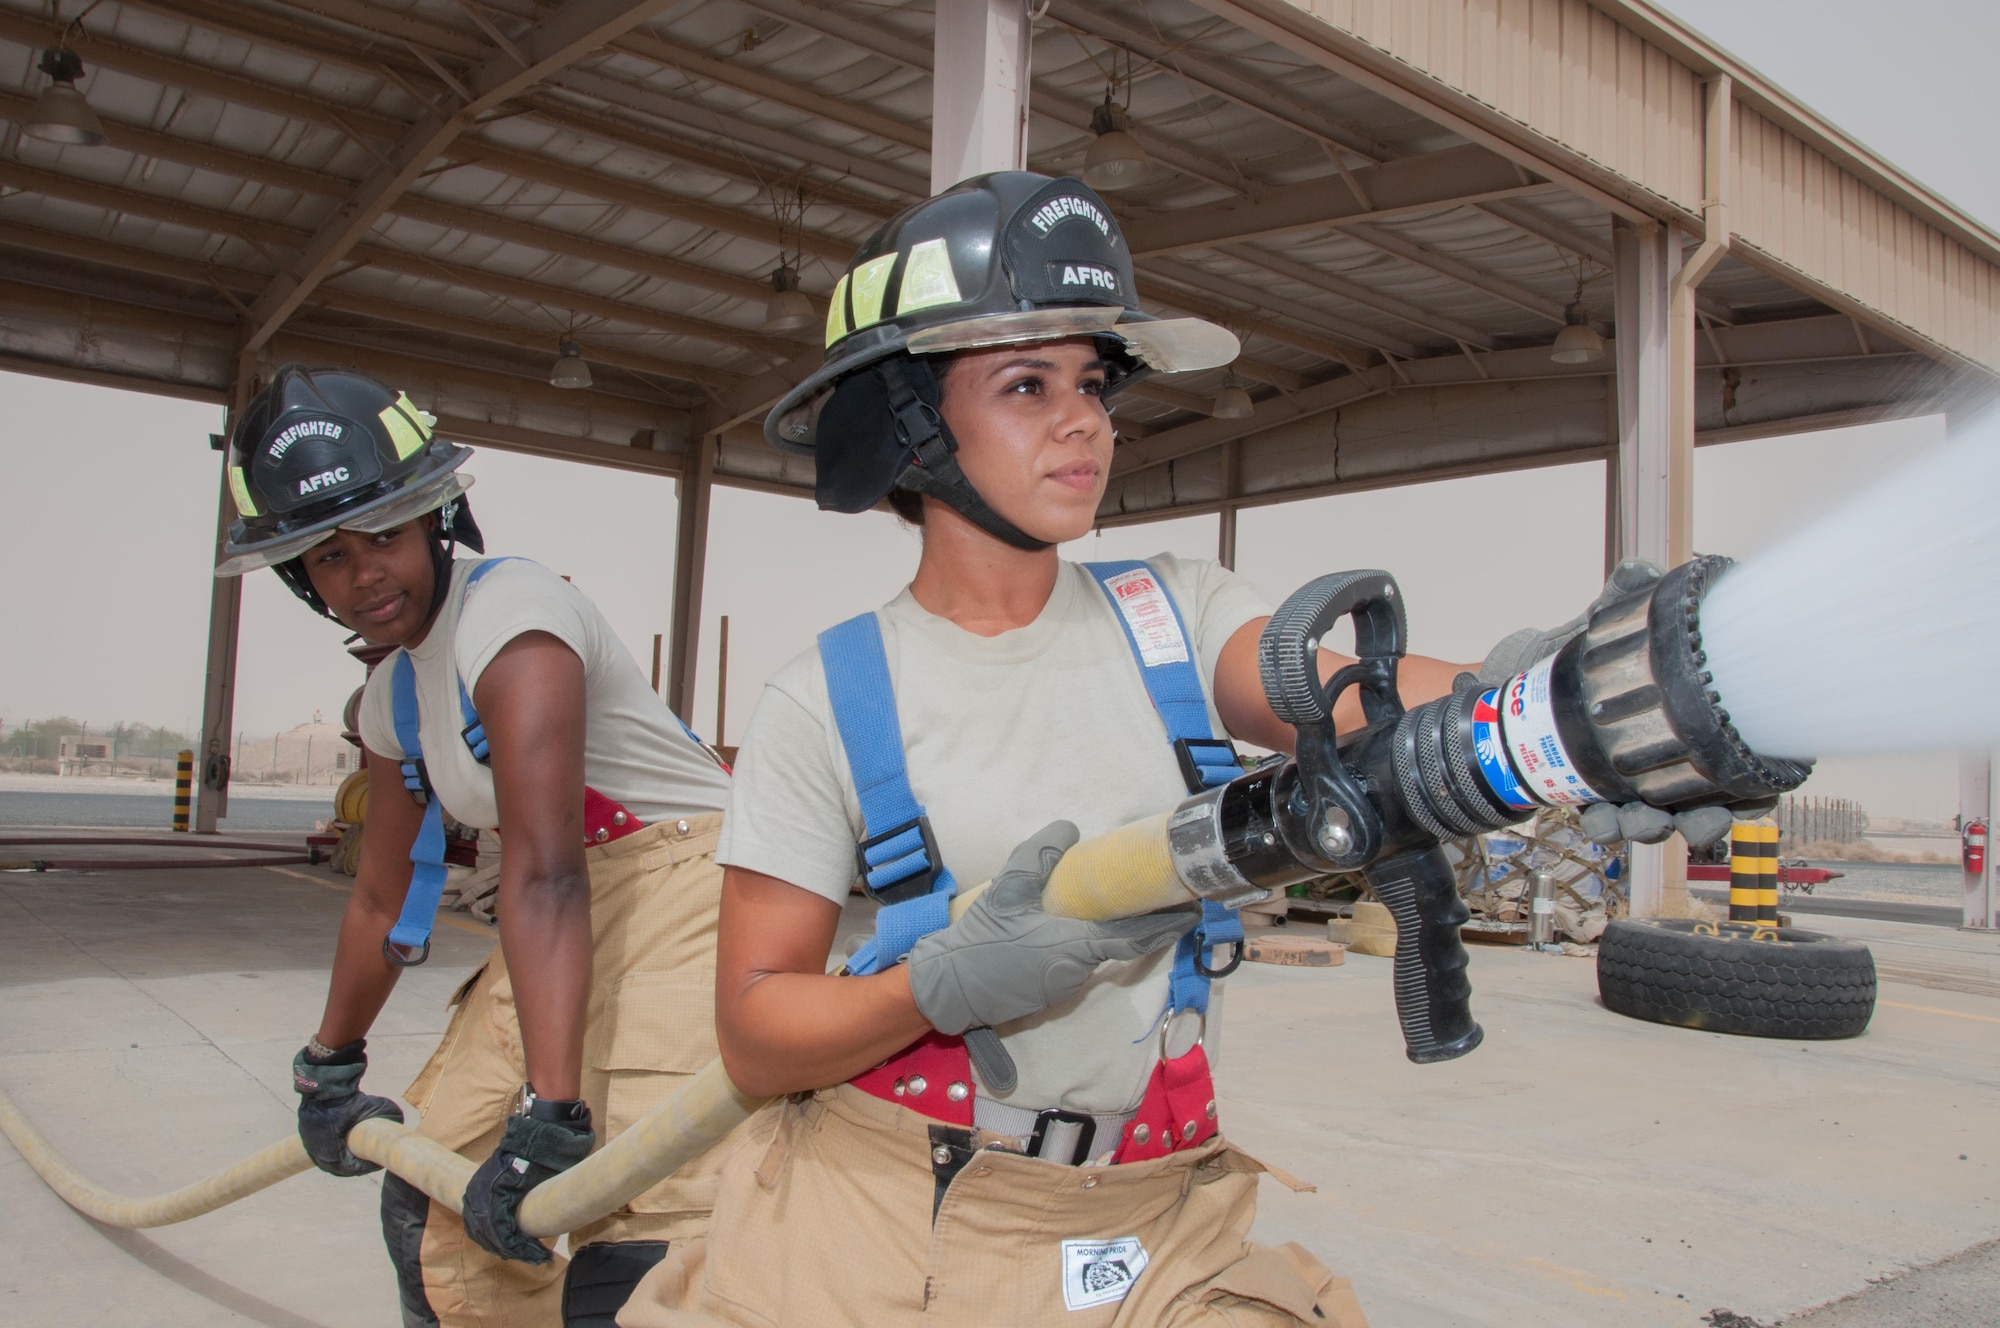 Staff Sgt. Jessica Mendoza (right) operates a hand line with assistance from Senior Airman Christa Dennis at one of the 386th Air Expeditionary Wing's fire stations an undisclosed location in Southwest Asia, June 25, 2017. Mendoza and Dennis are firefighters assigned to the 386th Civil Engineer Squadron.(U.S. Air Force photo by Master Sgt. Eric M. Sharman)